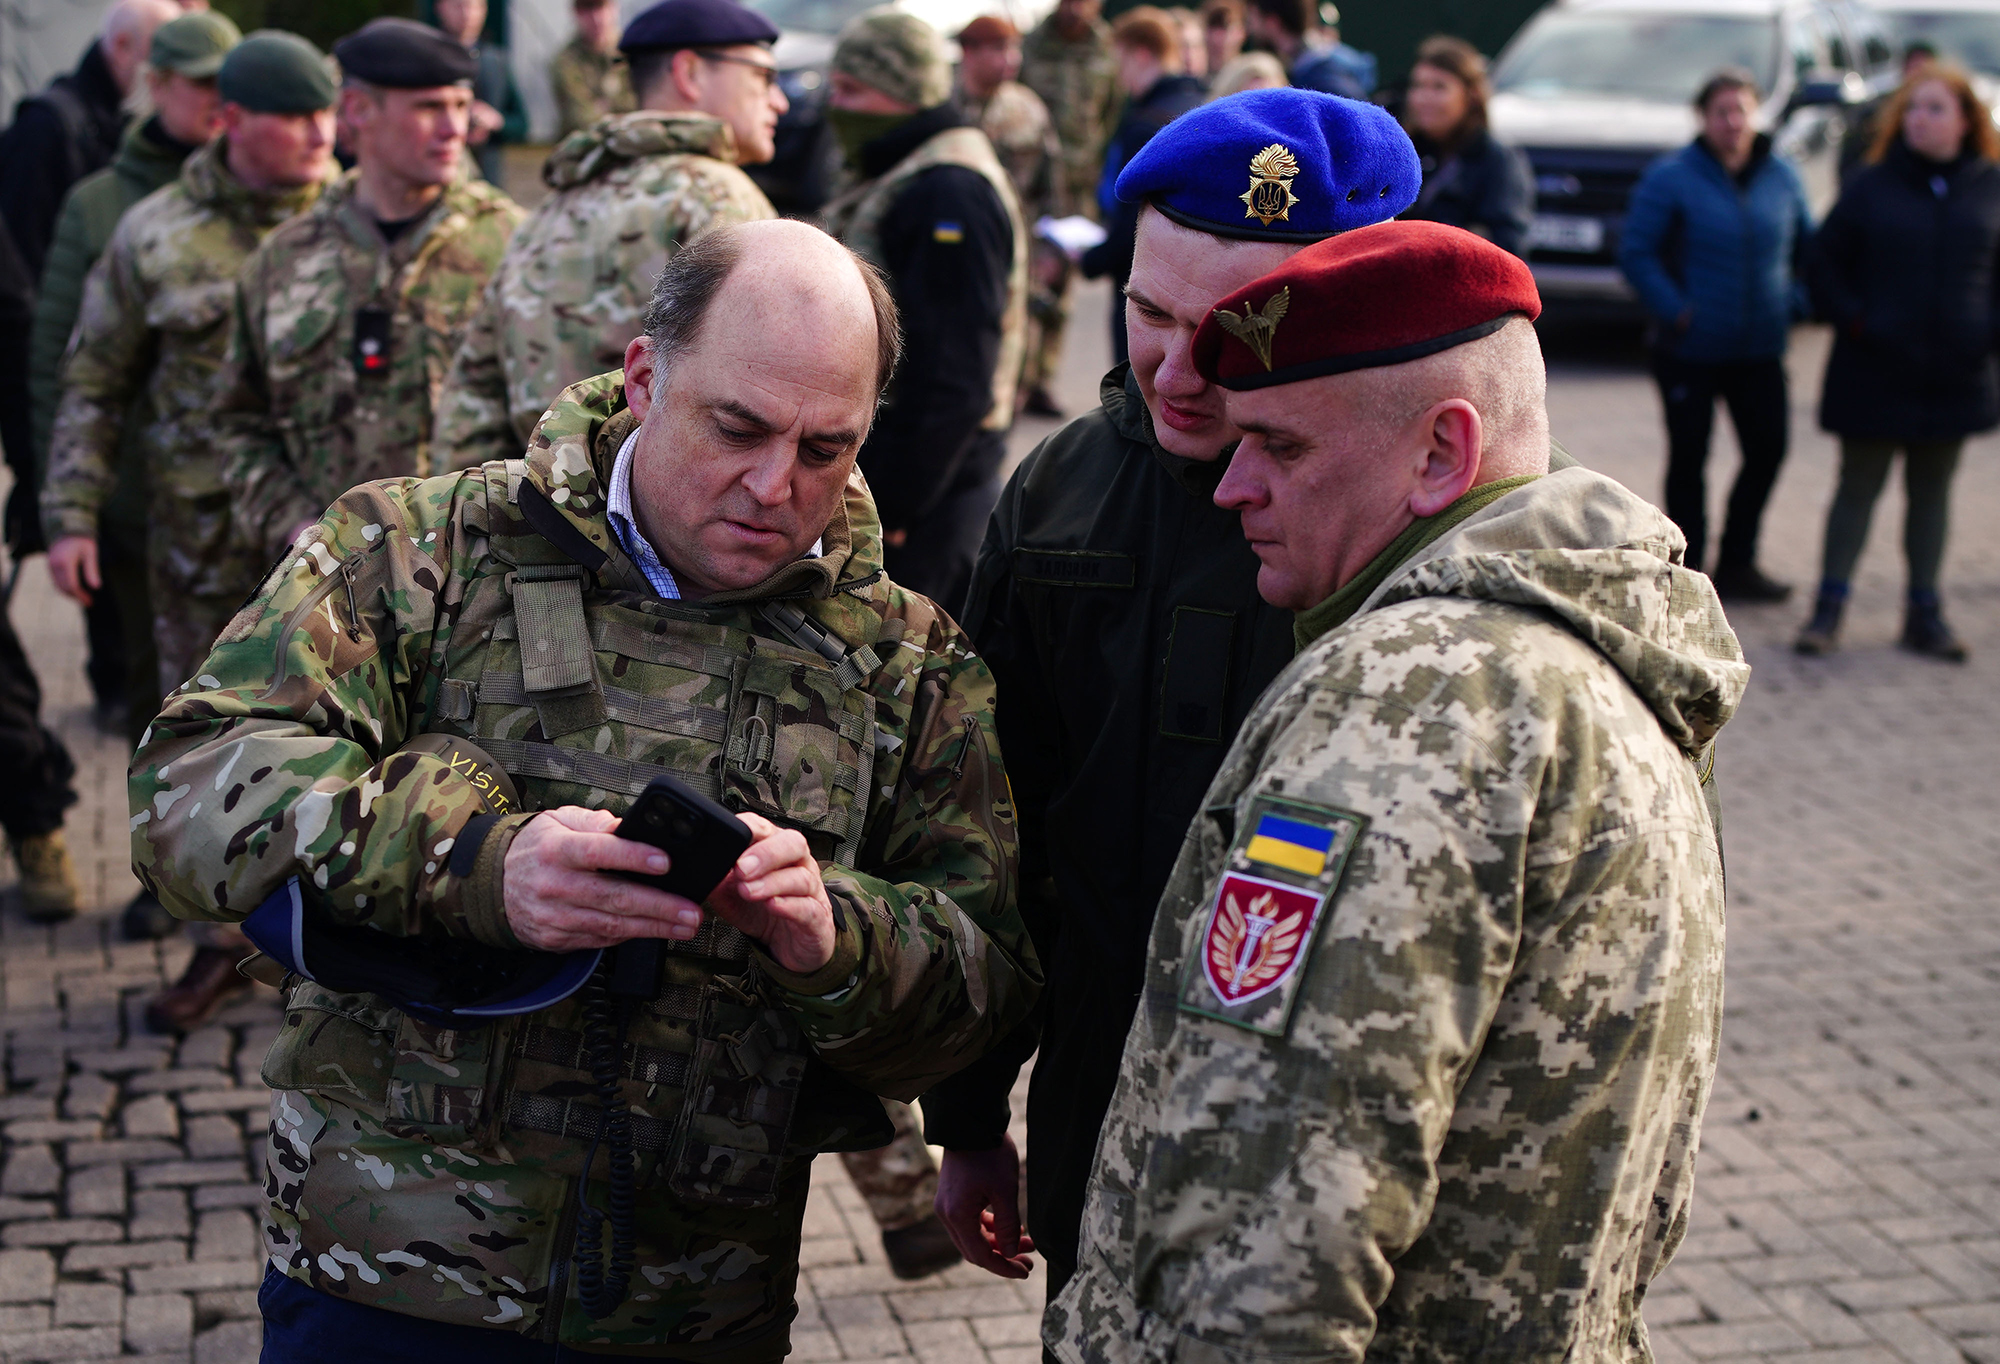 Defence Secretary Ben Wallace, left, meets Ukrainian soldiers during a visit to Bovington Camp on February 22, in Dorset, England.